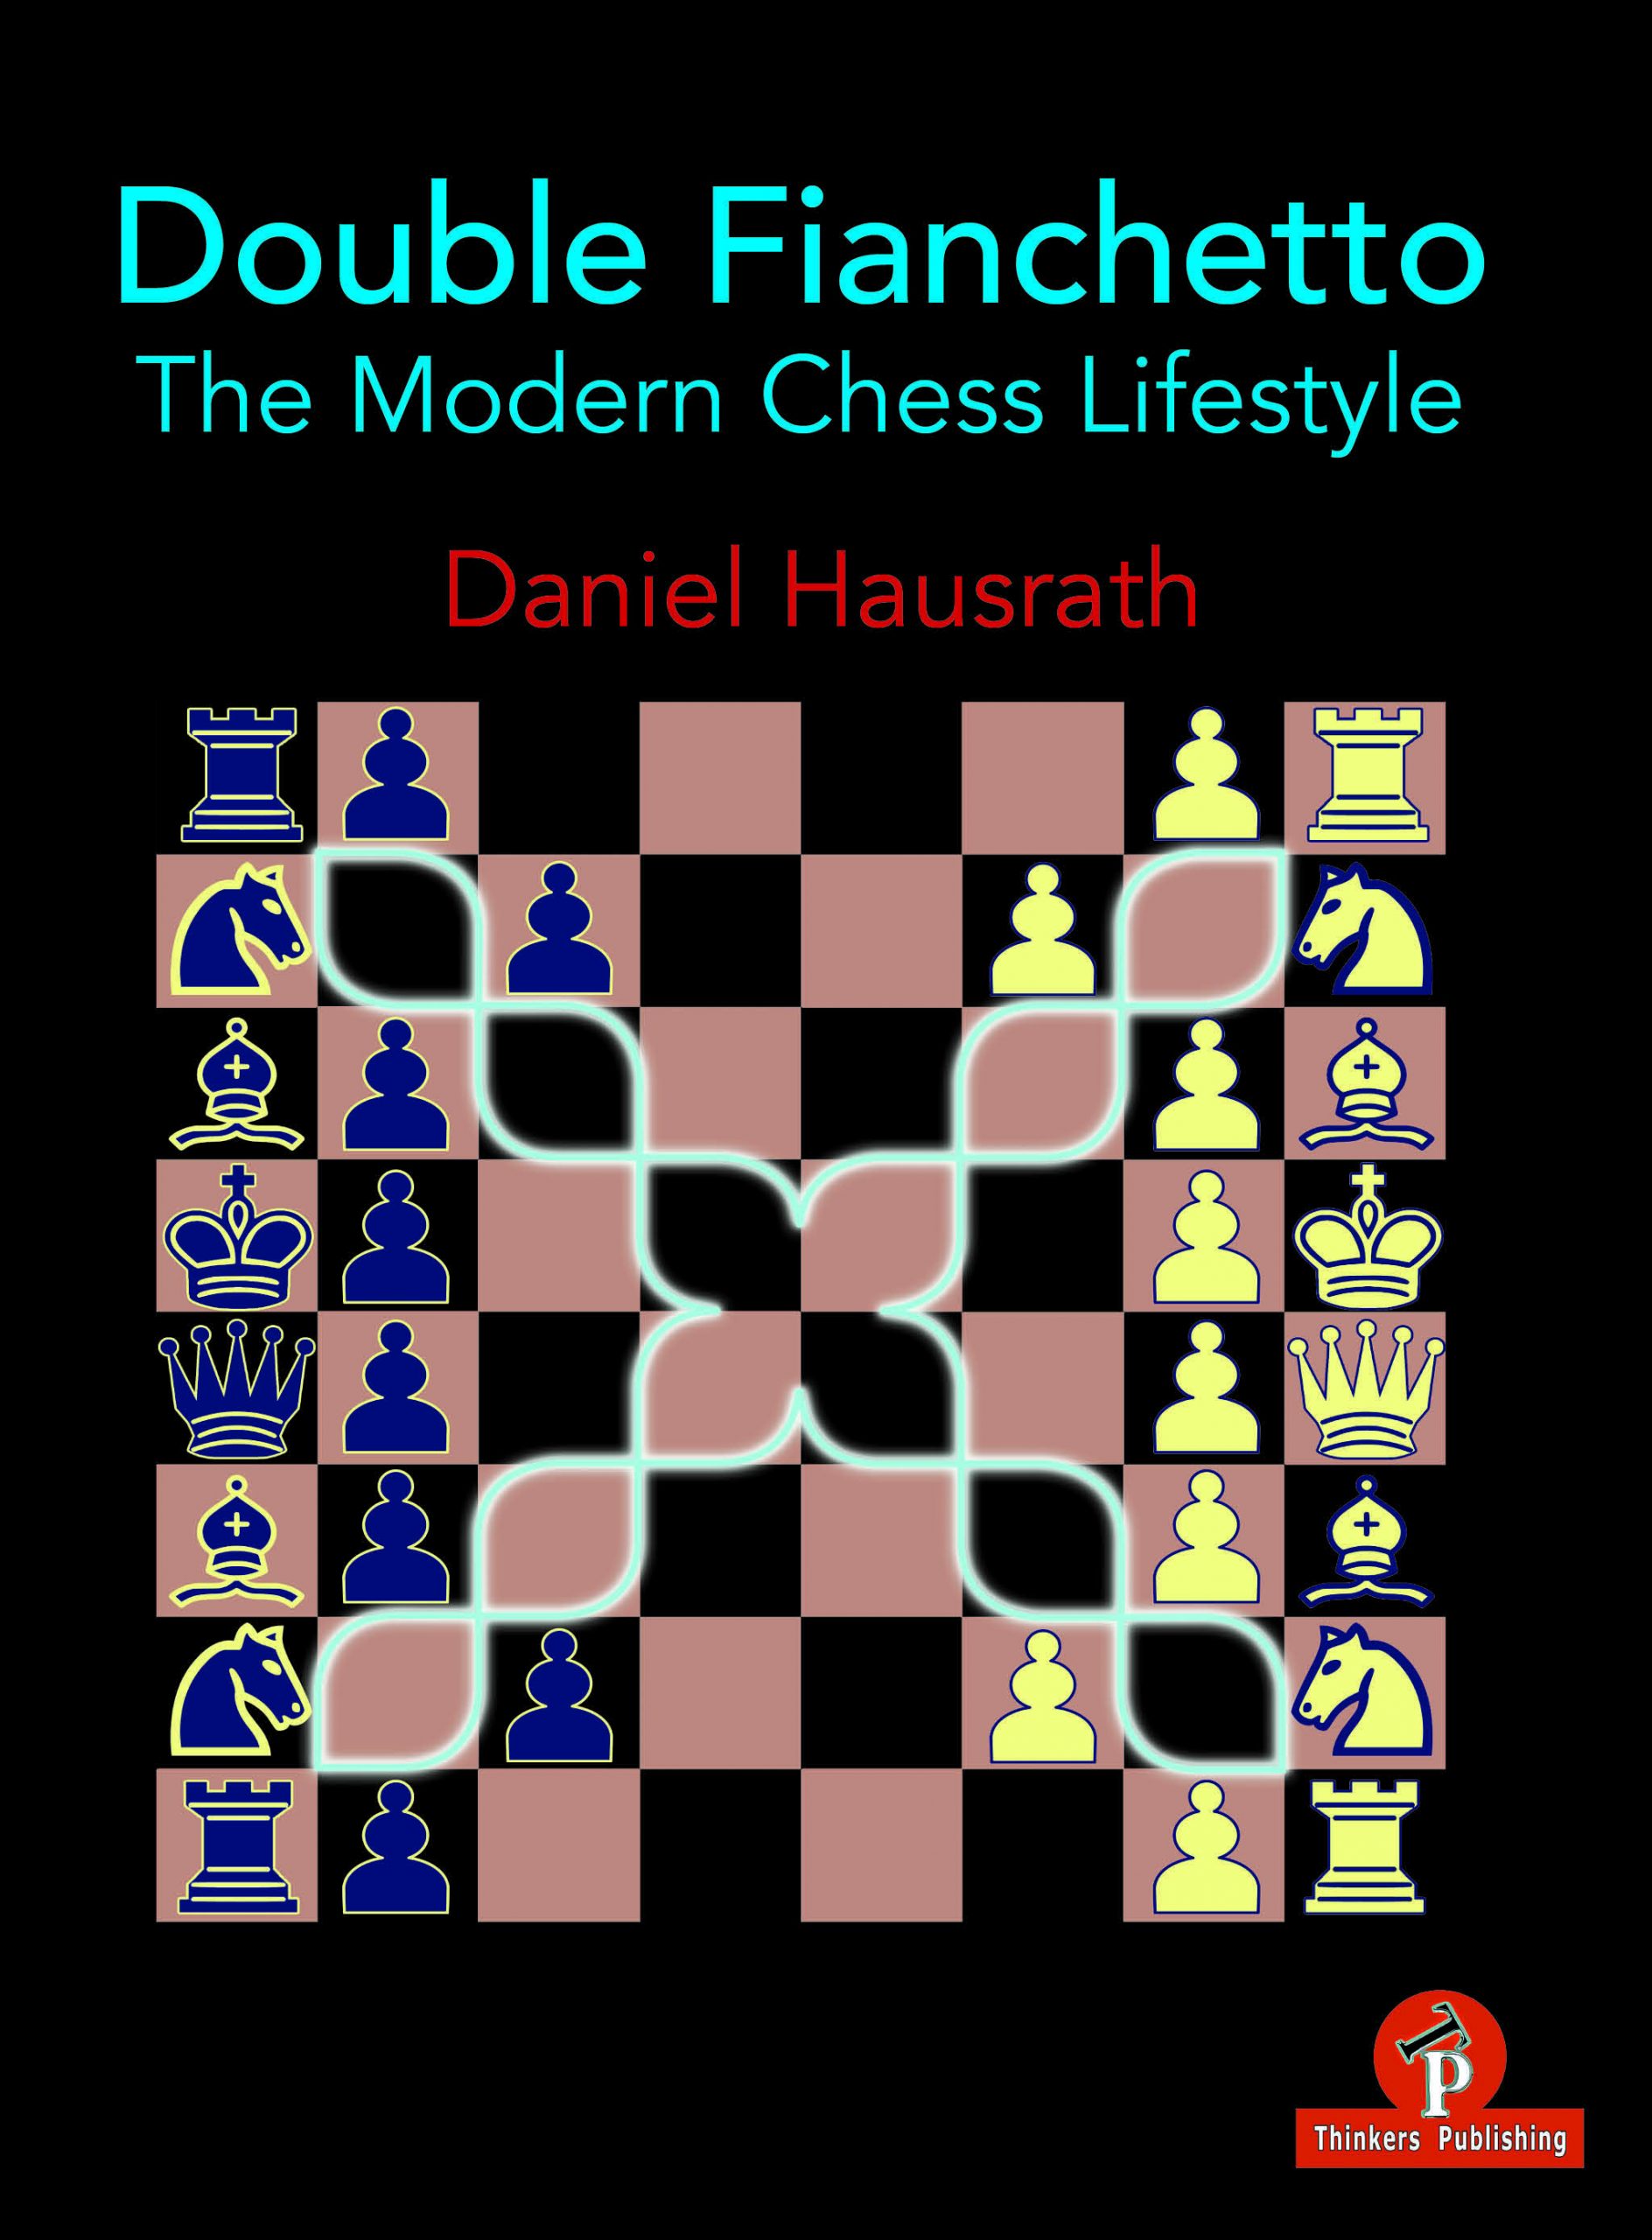 This is a page from the book, Modern Chess Openings. How do I read